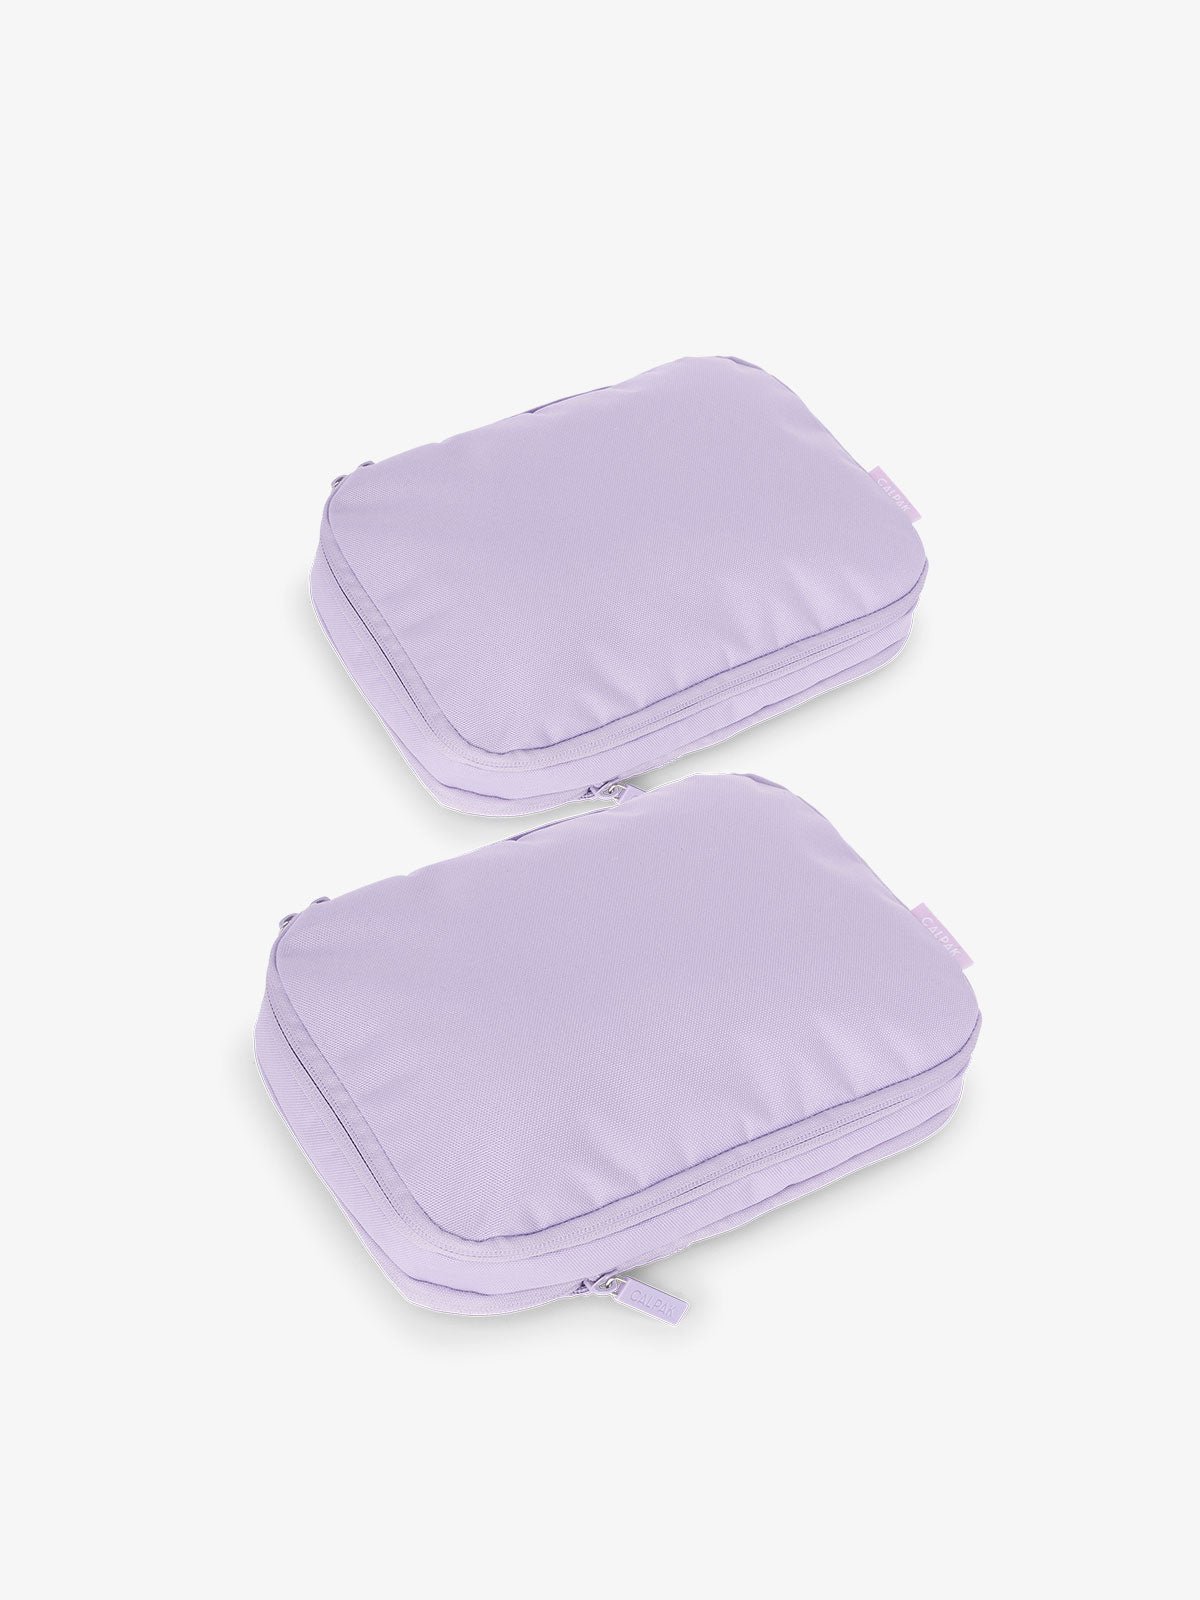 CALPAK small compression packing cubes in lavender